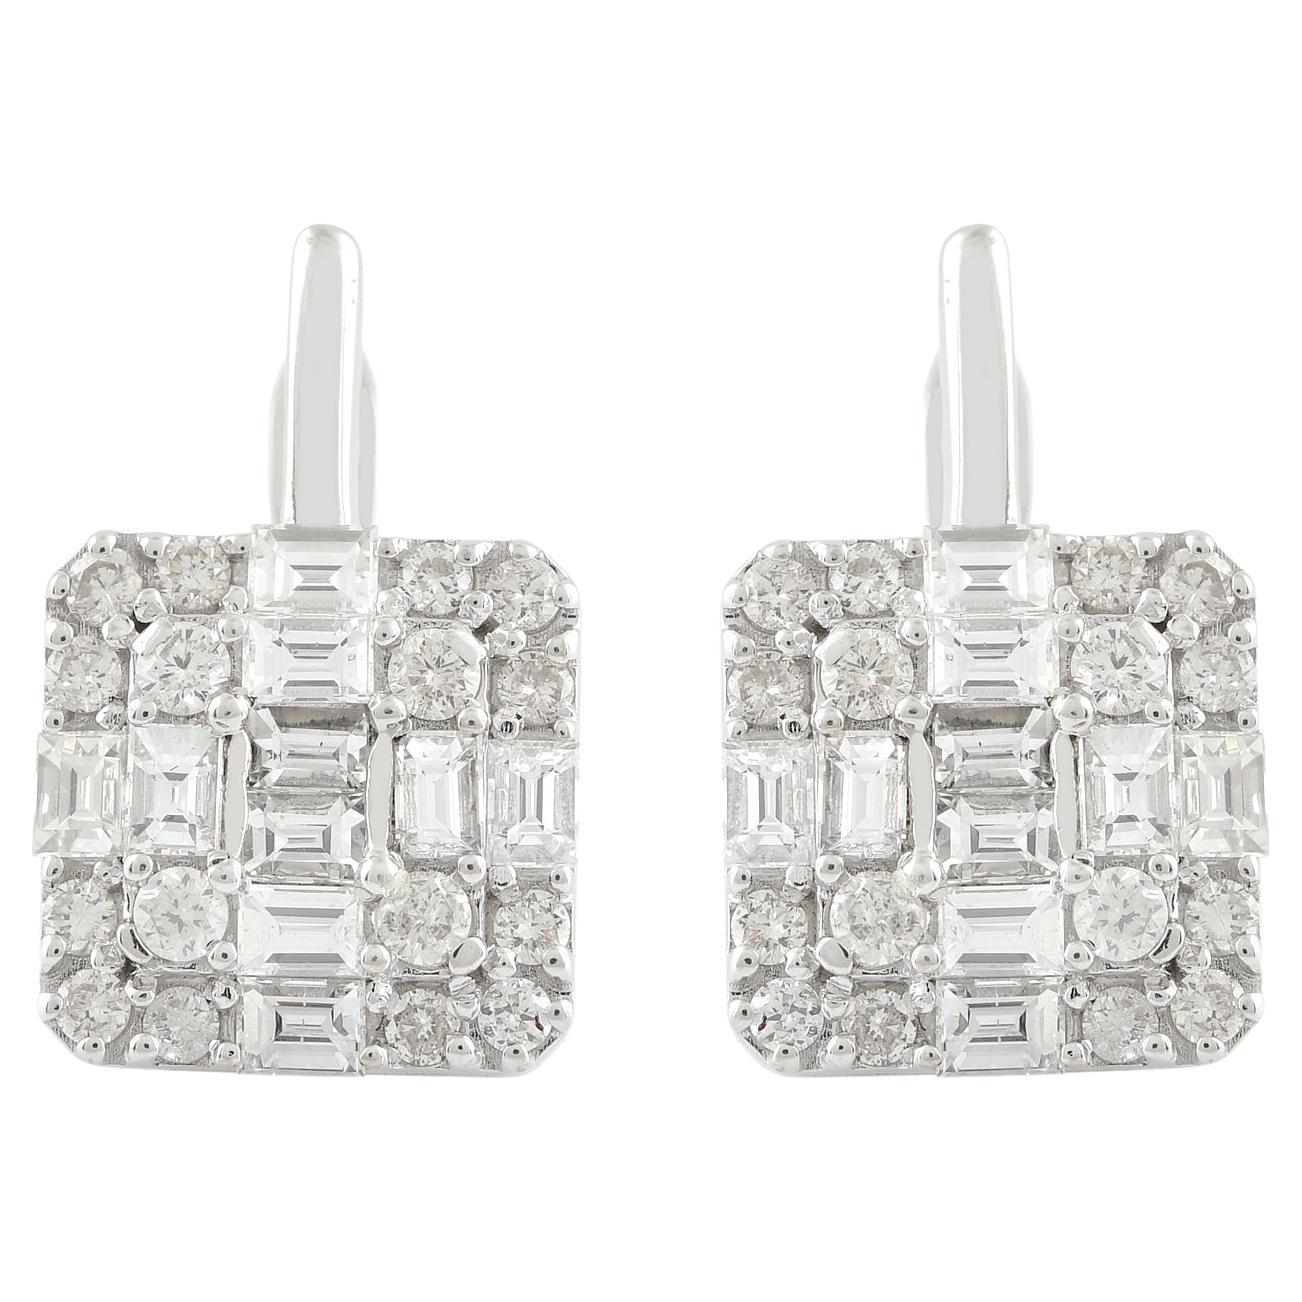 2.20 Carat SI Clarity HI Color Baguette Diamond Earrings 10k White Gold Jewelry For Sale